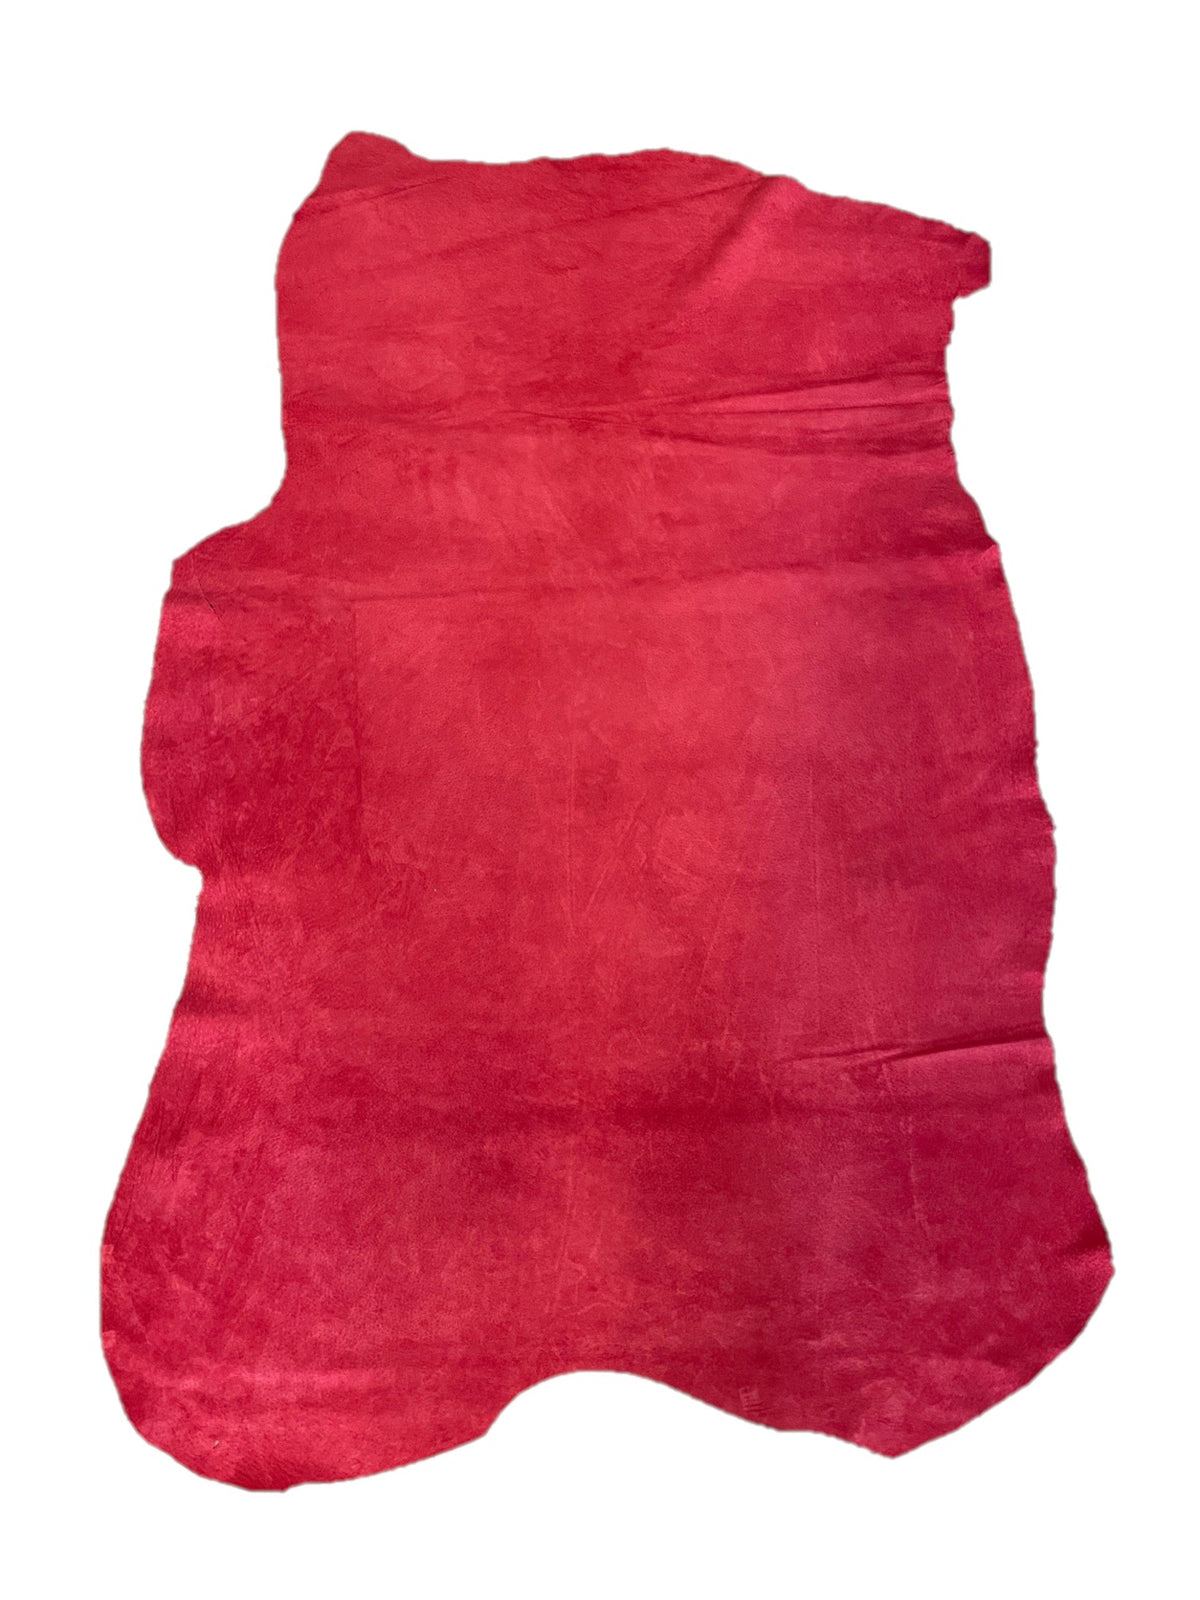 Pig Skin Suede | Light Red | 0.6 mm | 8 sq.ft | From $25 ea.